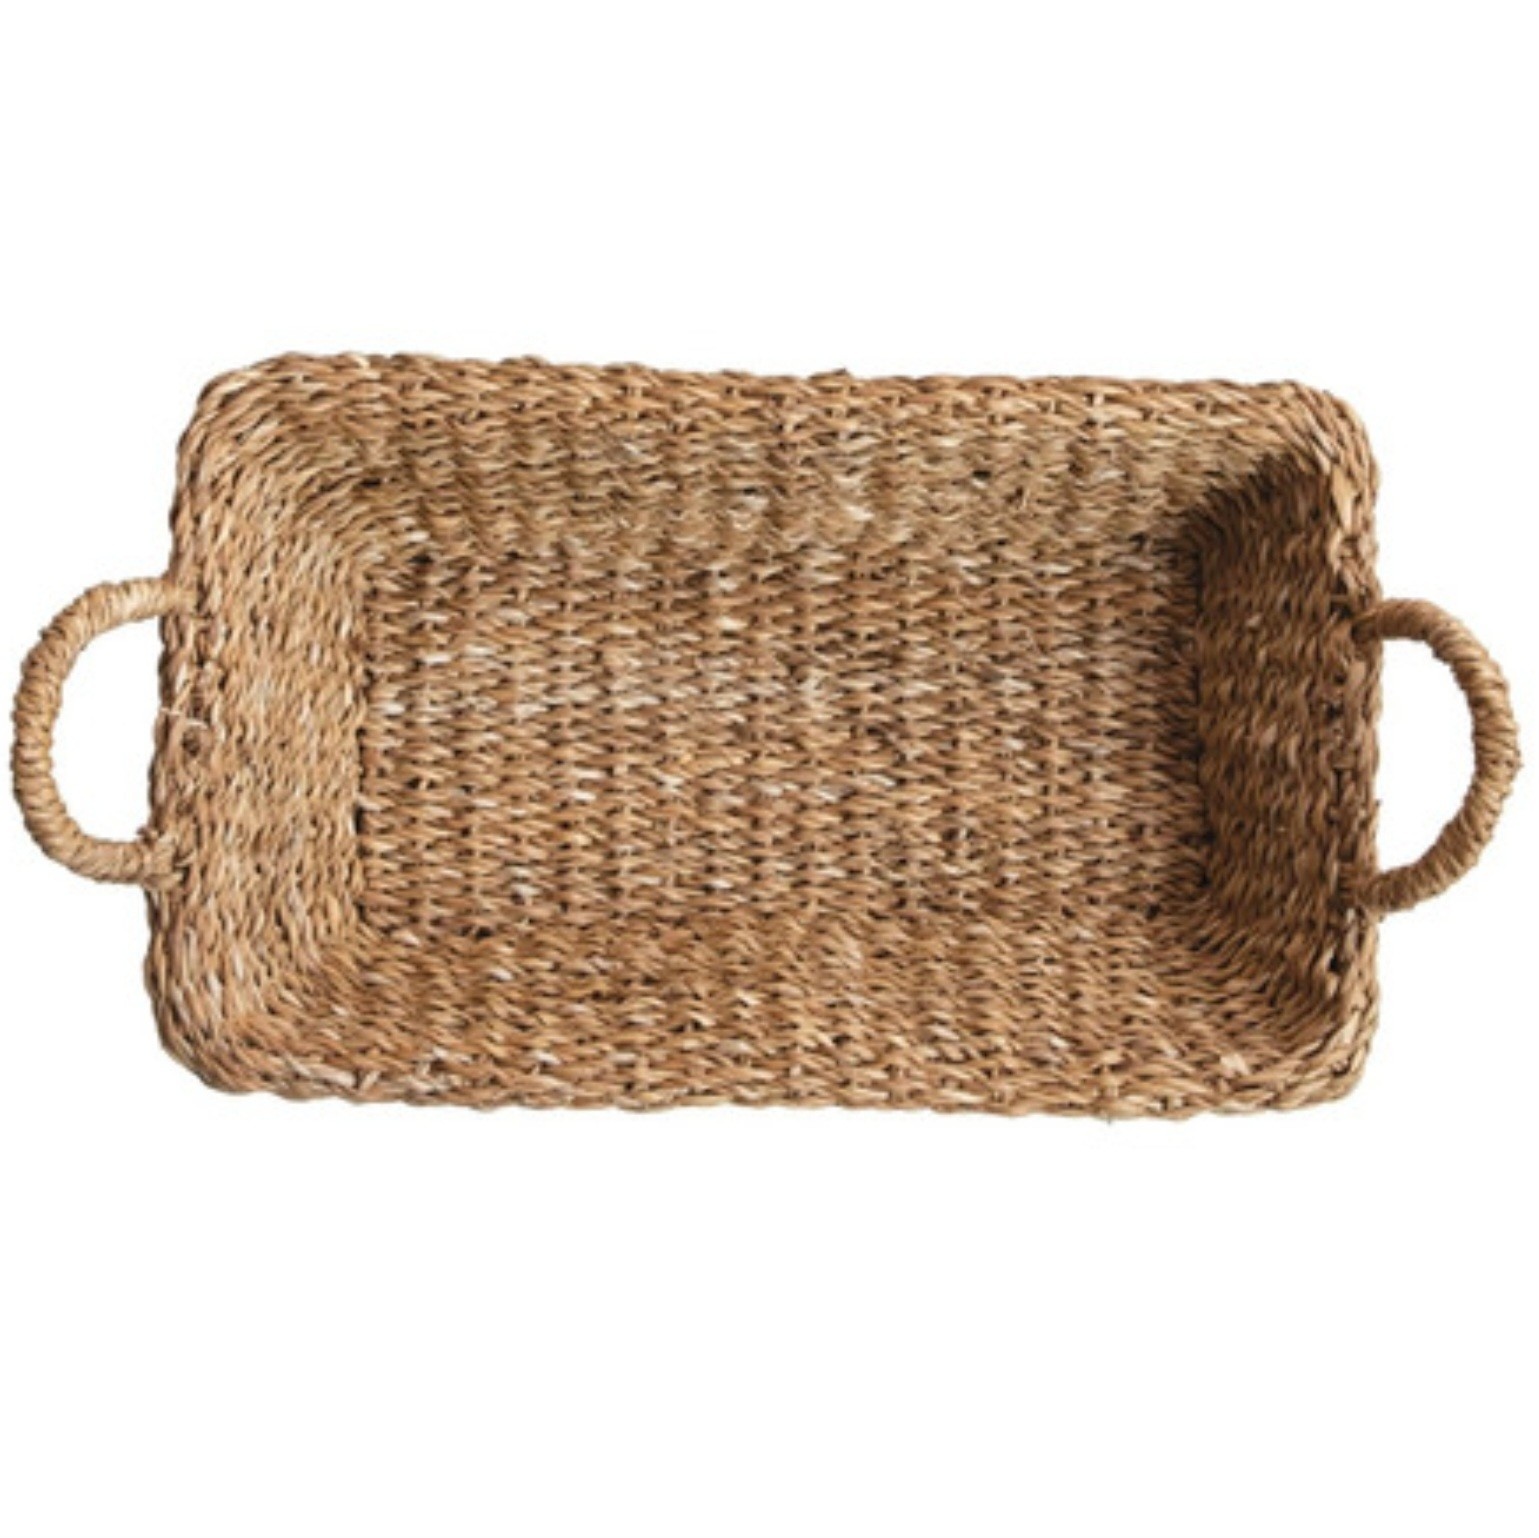 Hand-Woven Seagrass Double Walled Trays With Handles, Natural 20"L x 12"W x 4"H, Available for local pick up